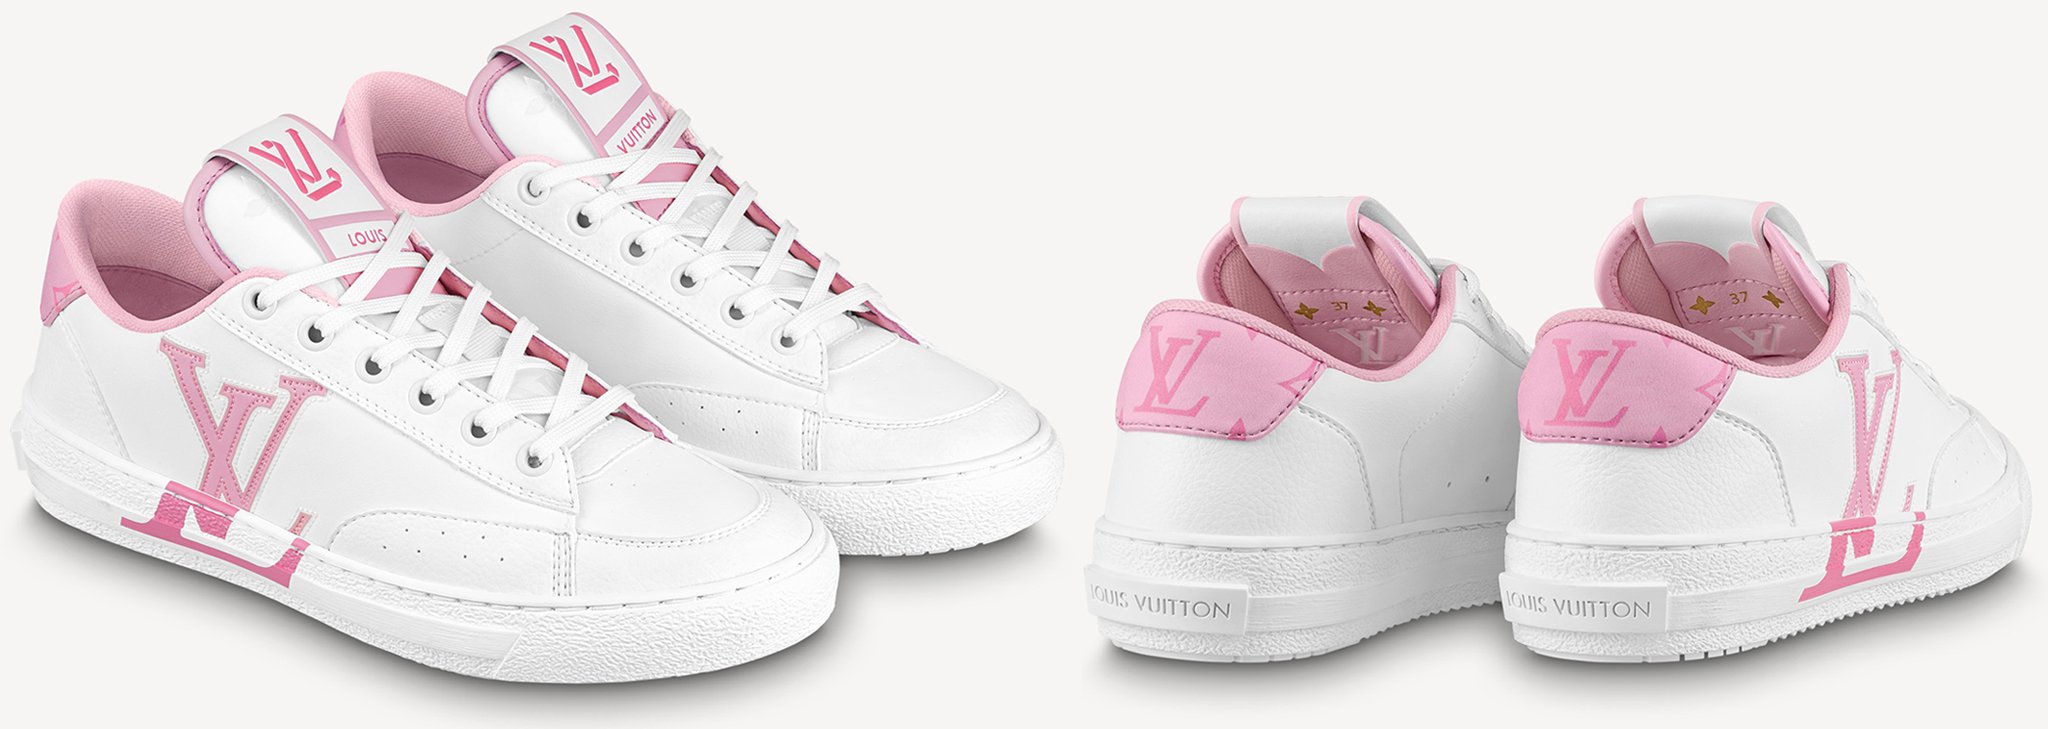 Louis Vuitton's first eco-designed shoes, the Charlie sneakers are made from a mix of recycled and bio-based sustainable materials with recycled laces, recycled polyester monogram textile, and upcycled logo on the tongue